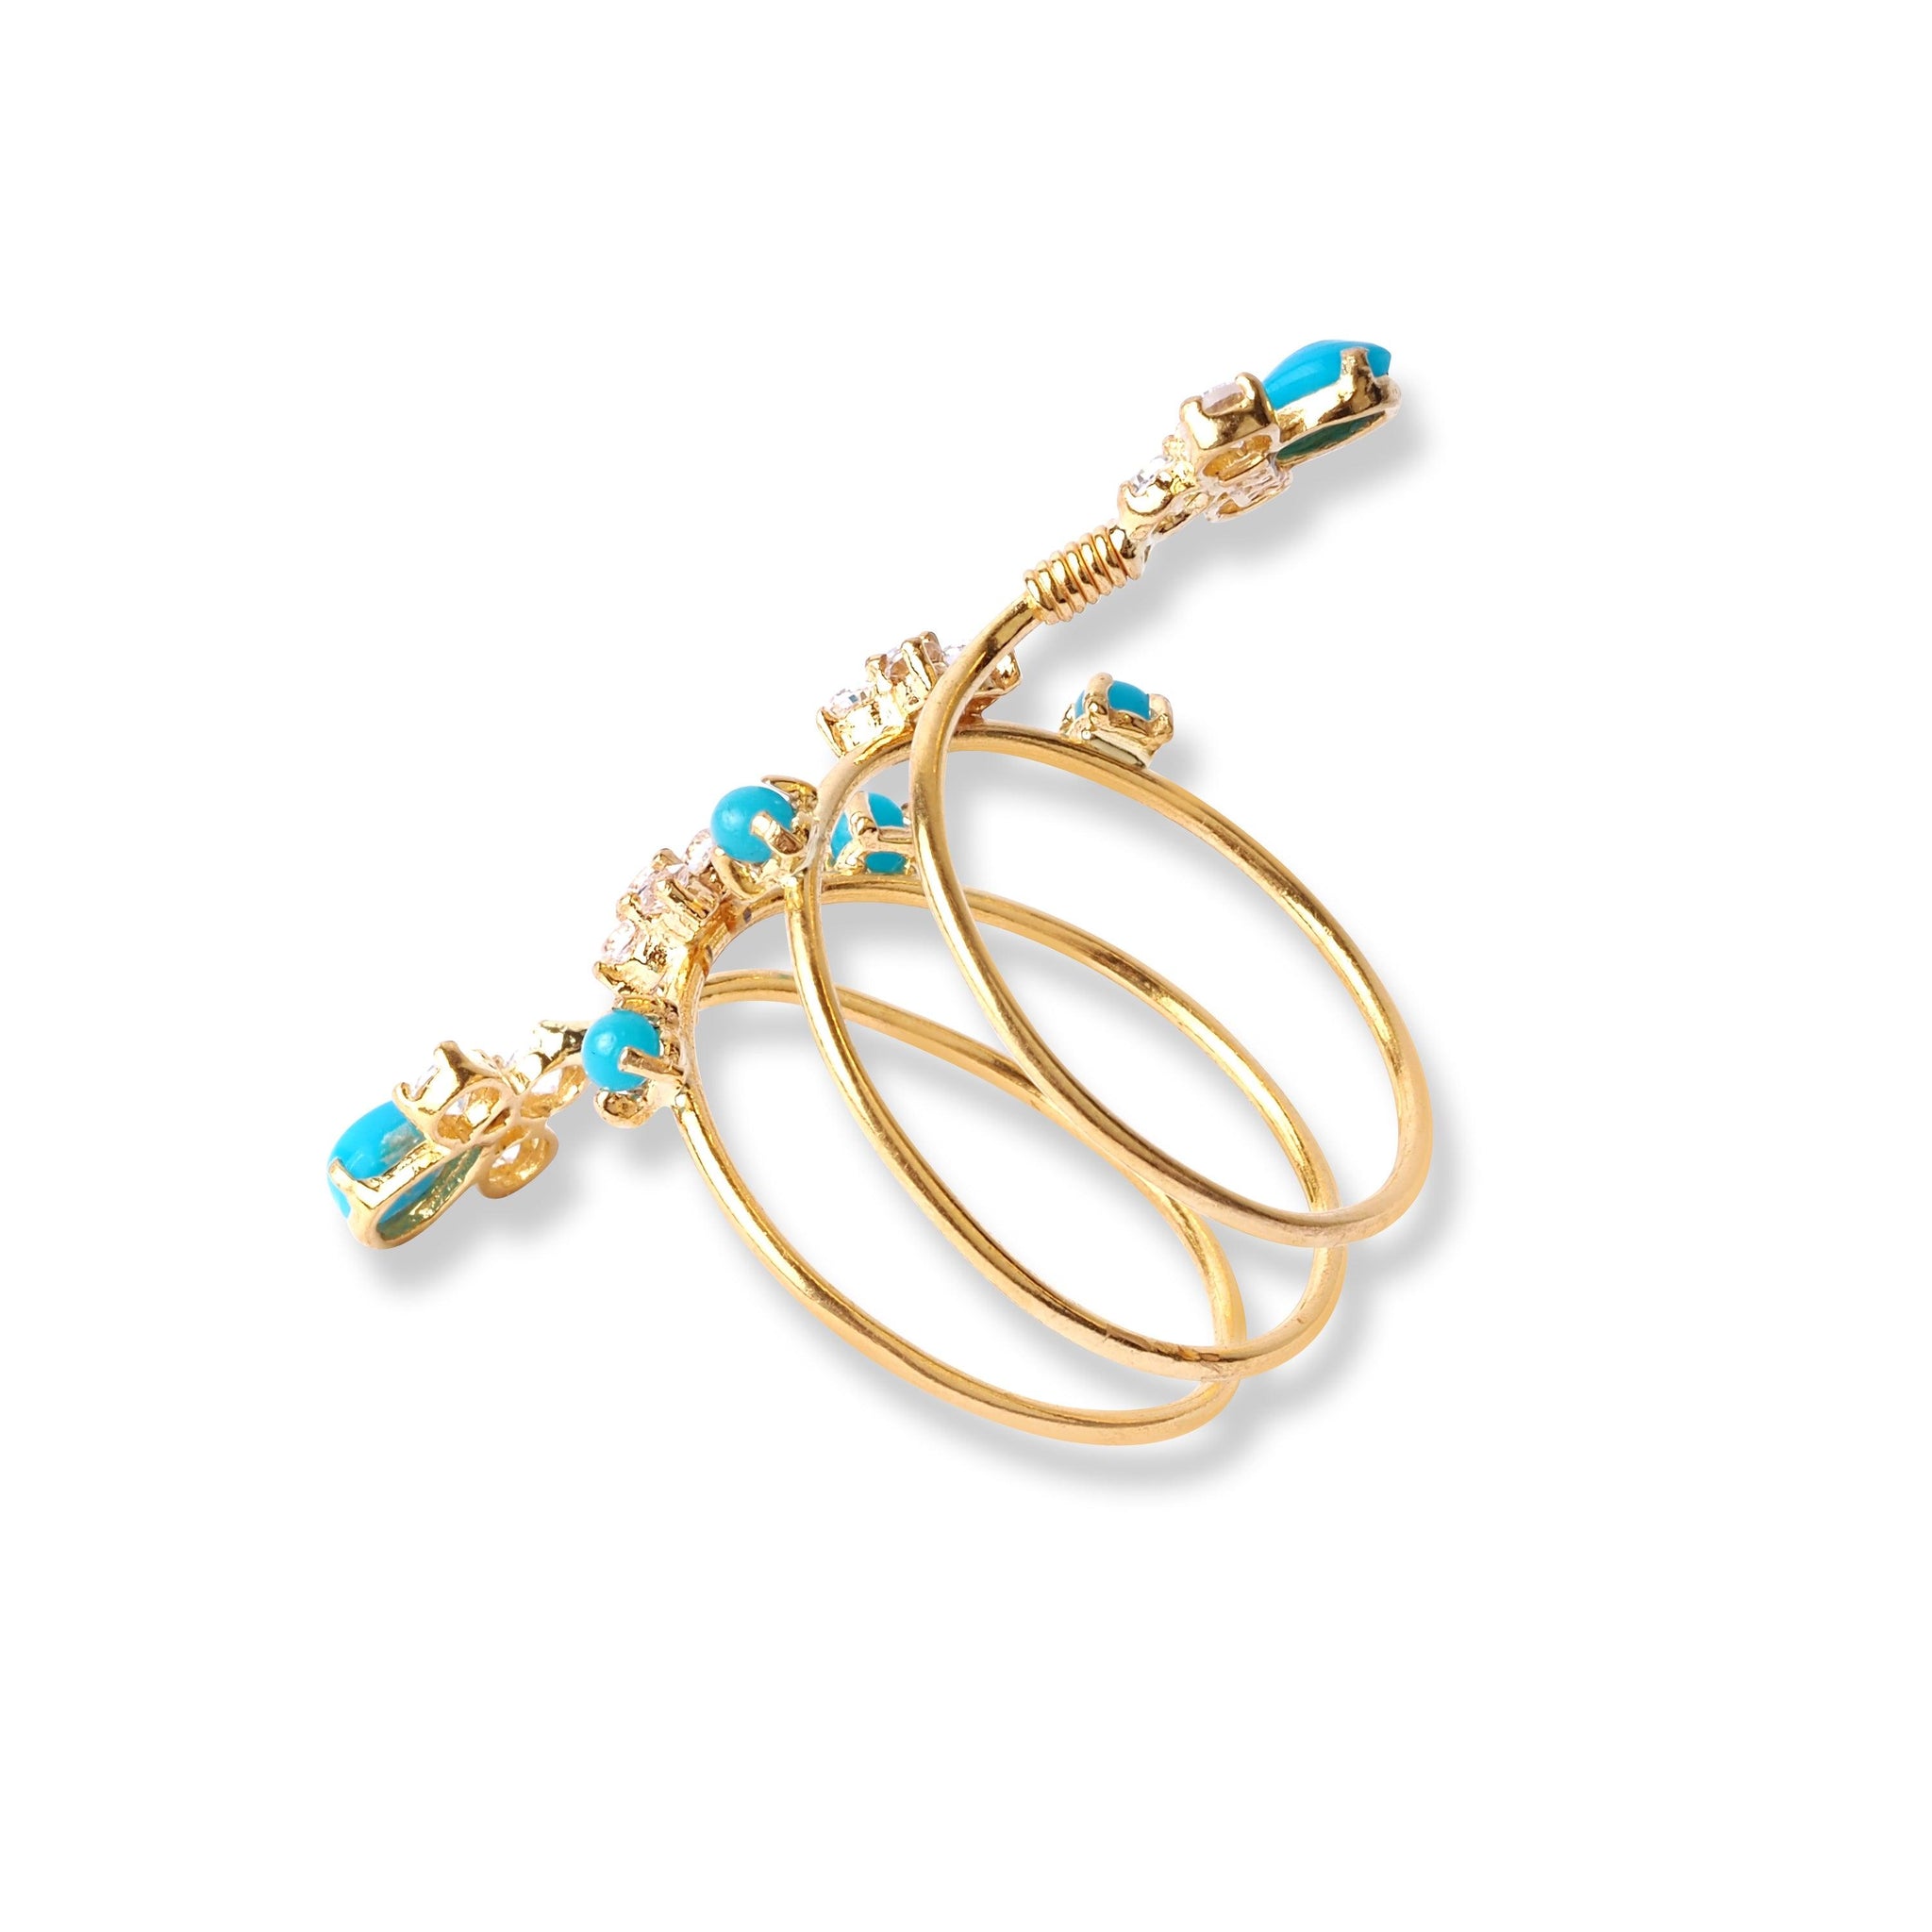 22ct Gold Spiral Ring With Cubic Zirconia and Turquoise Stones (4.4g) LR-6591